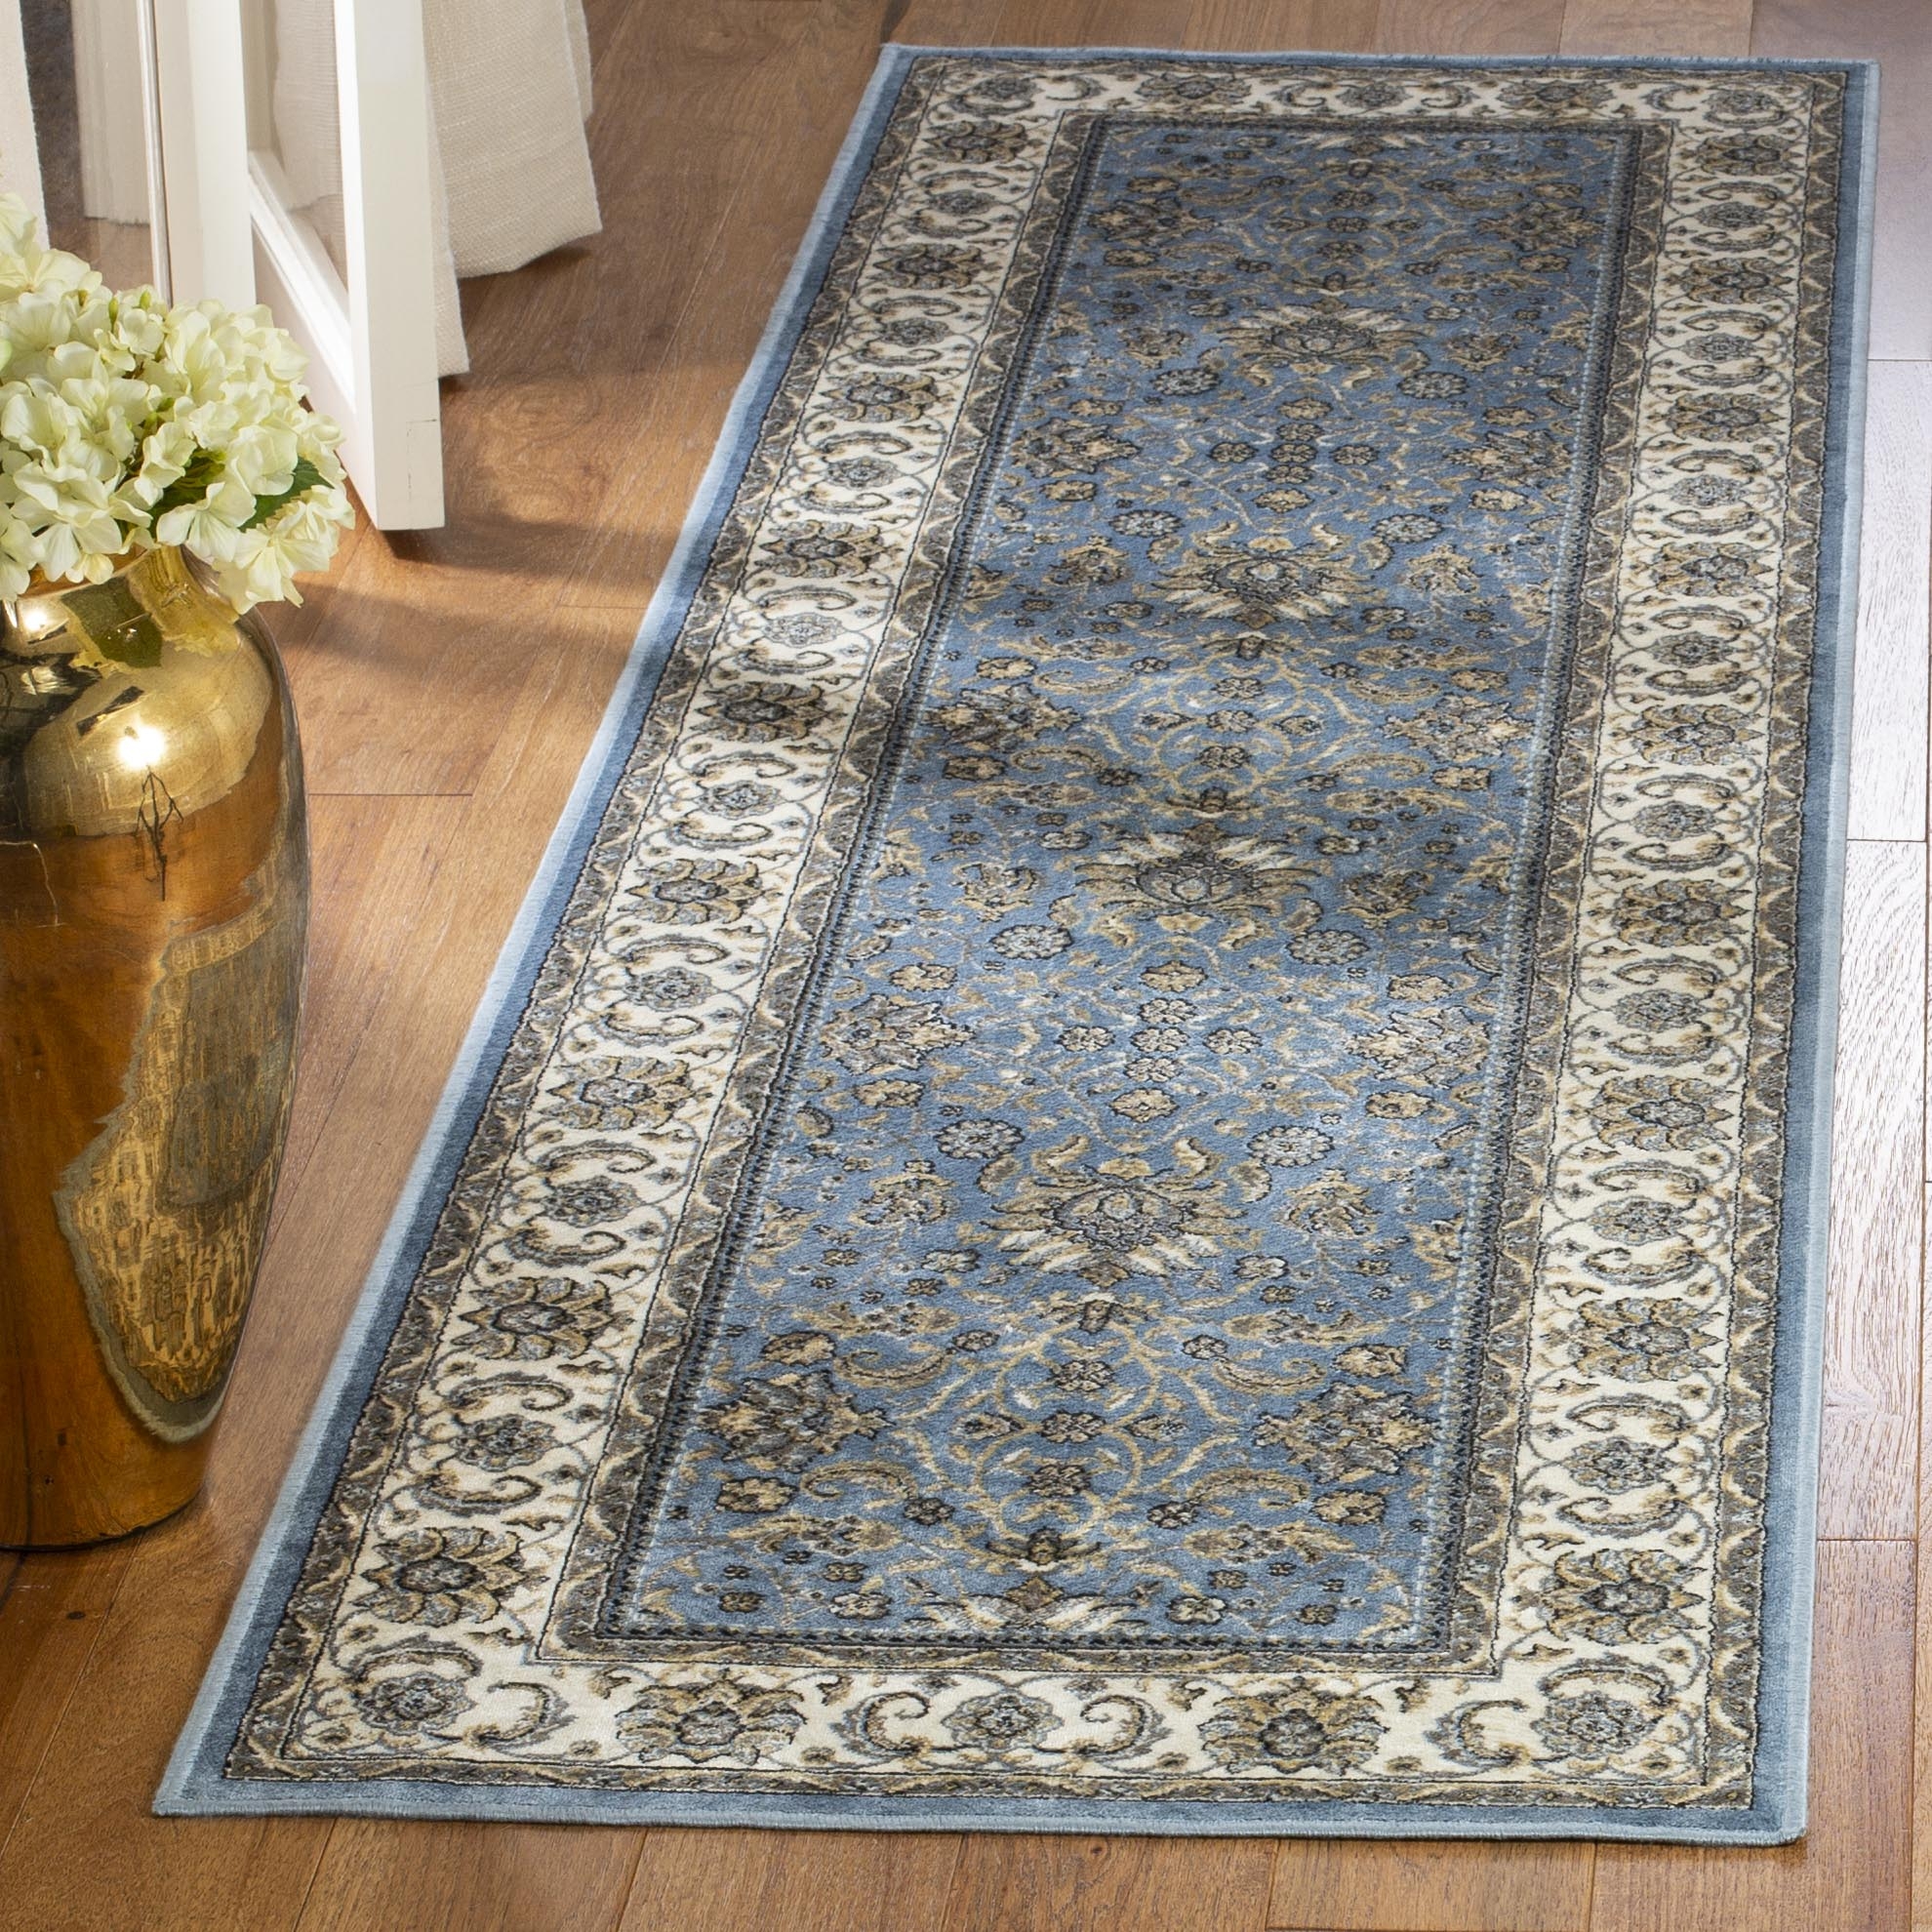 Arlo Home Woven Area Rug, ATL671L, Blue/Ivory,  2' 2" X 3' 7" - Image 1